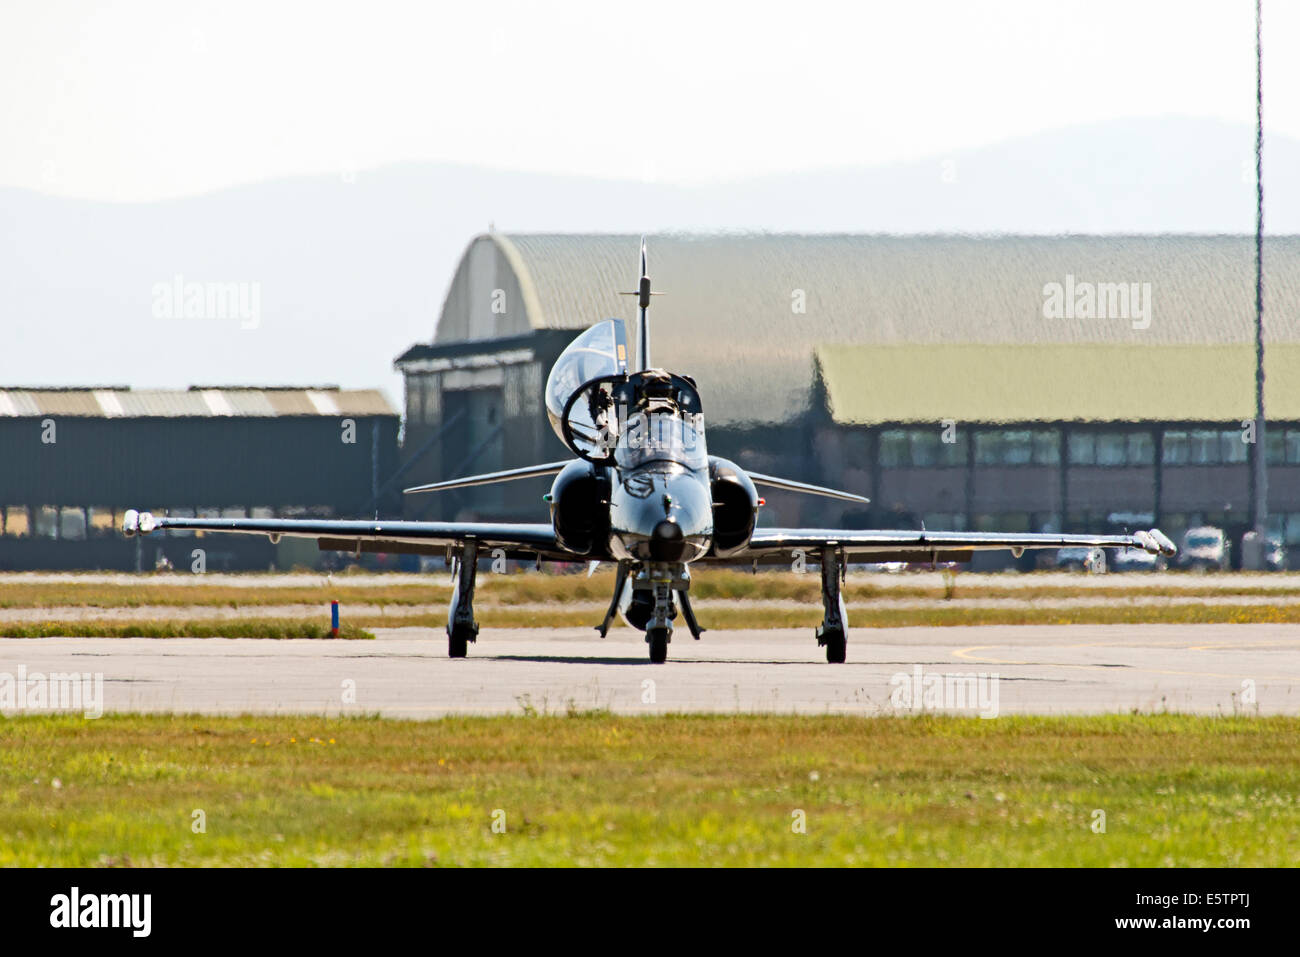 Raf Valley Anglesey North Wales UK. Hawk getto veloce Foto Stock